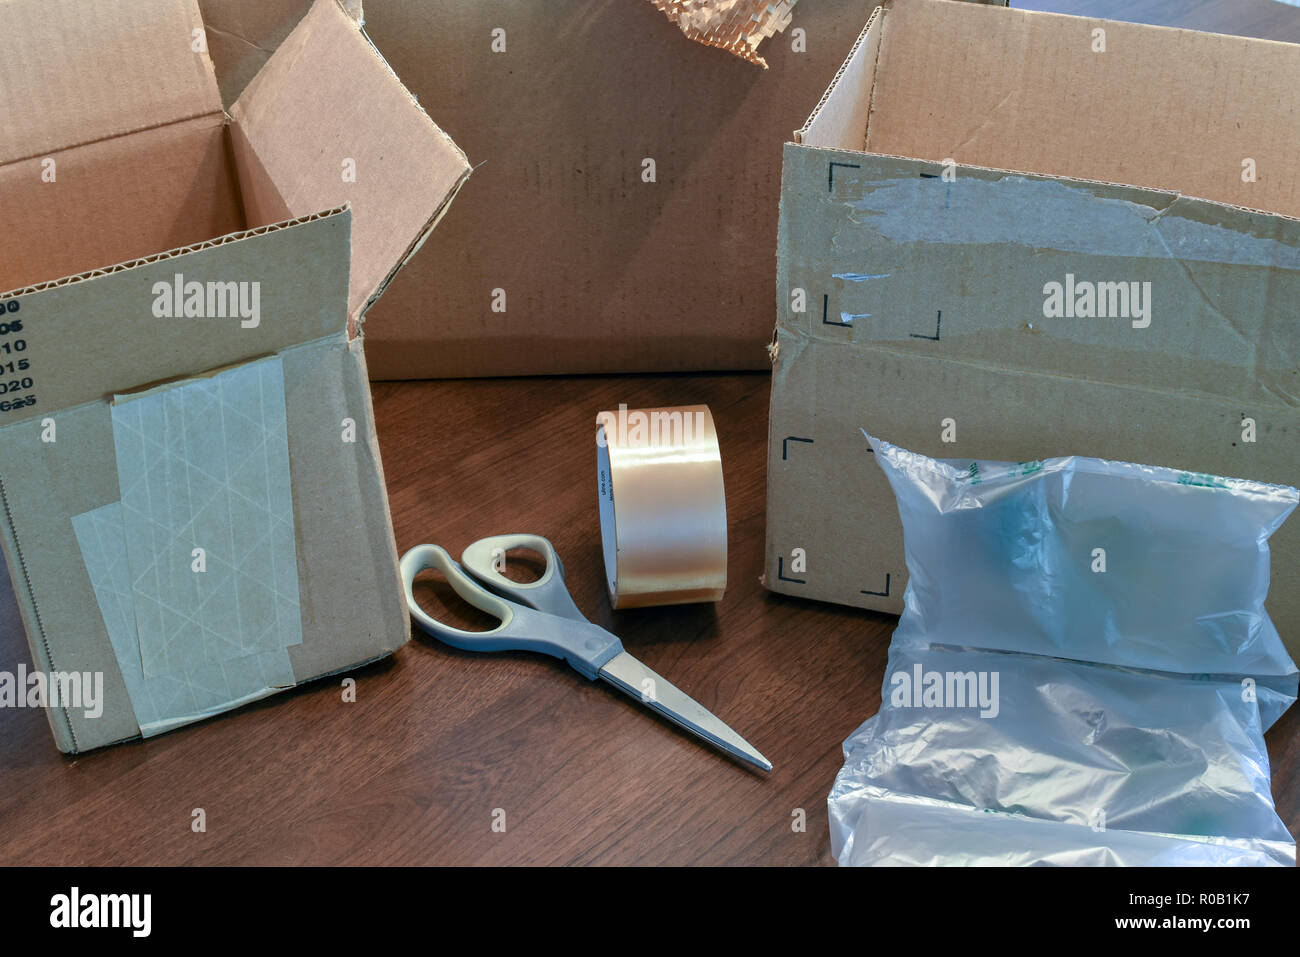 Packaging materials and supplies on a table Stock Photo